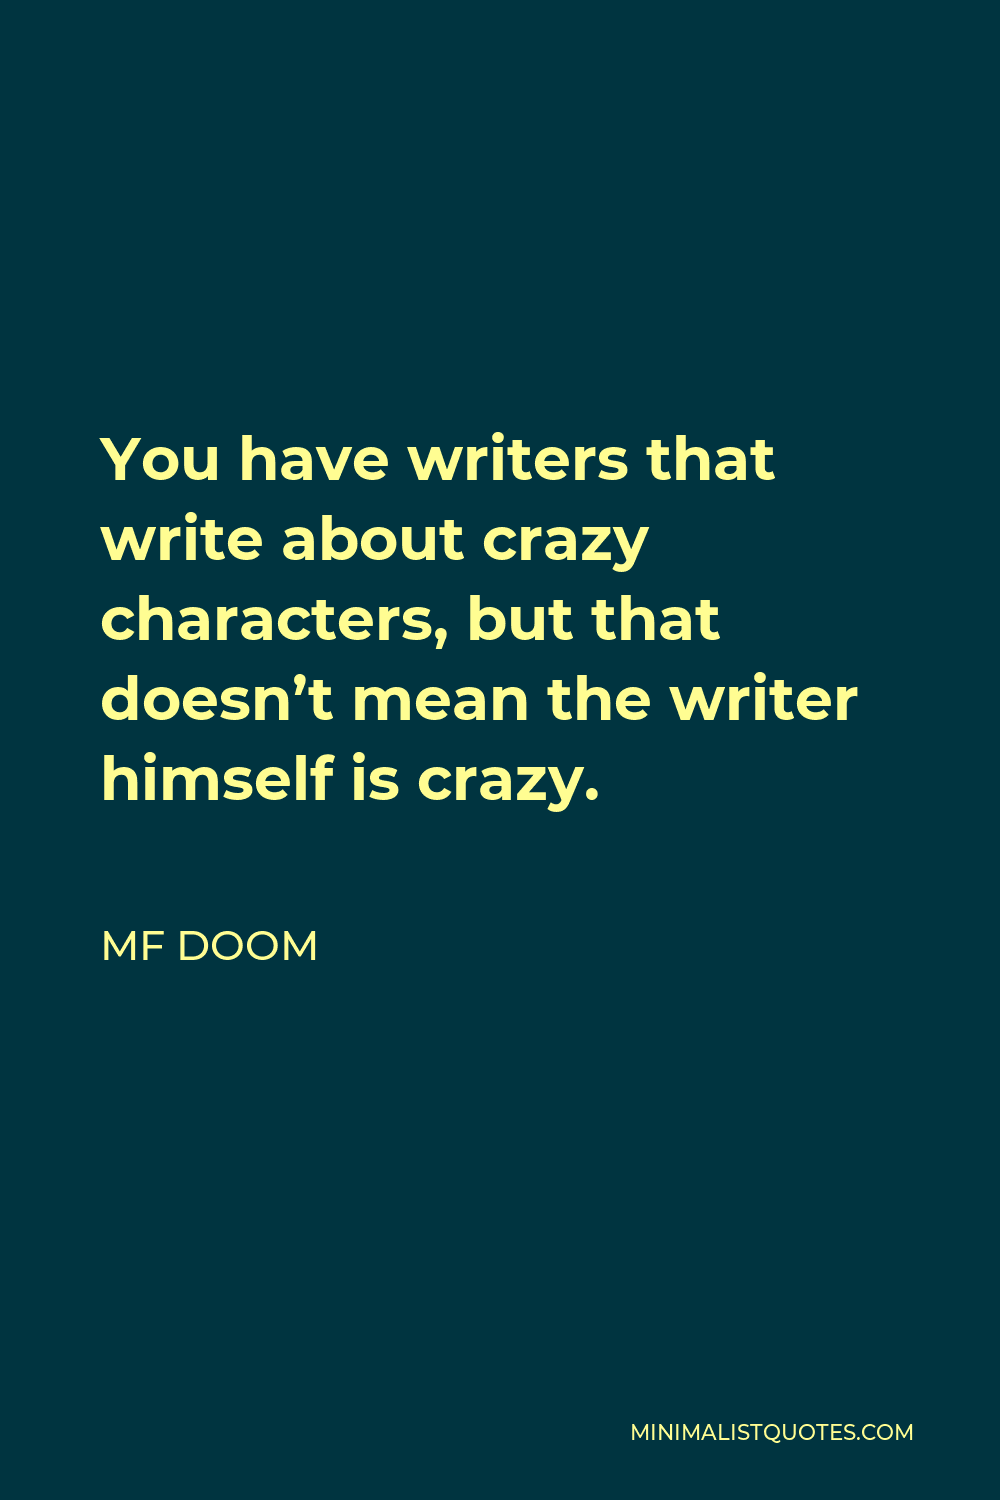 MF DOOM Quote - You have writers that write about crazy characters, but that doesn’t mean the writer himself is crazy.